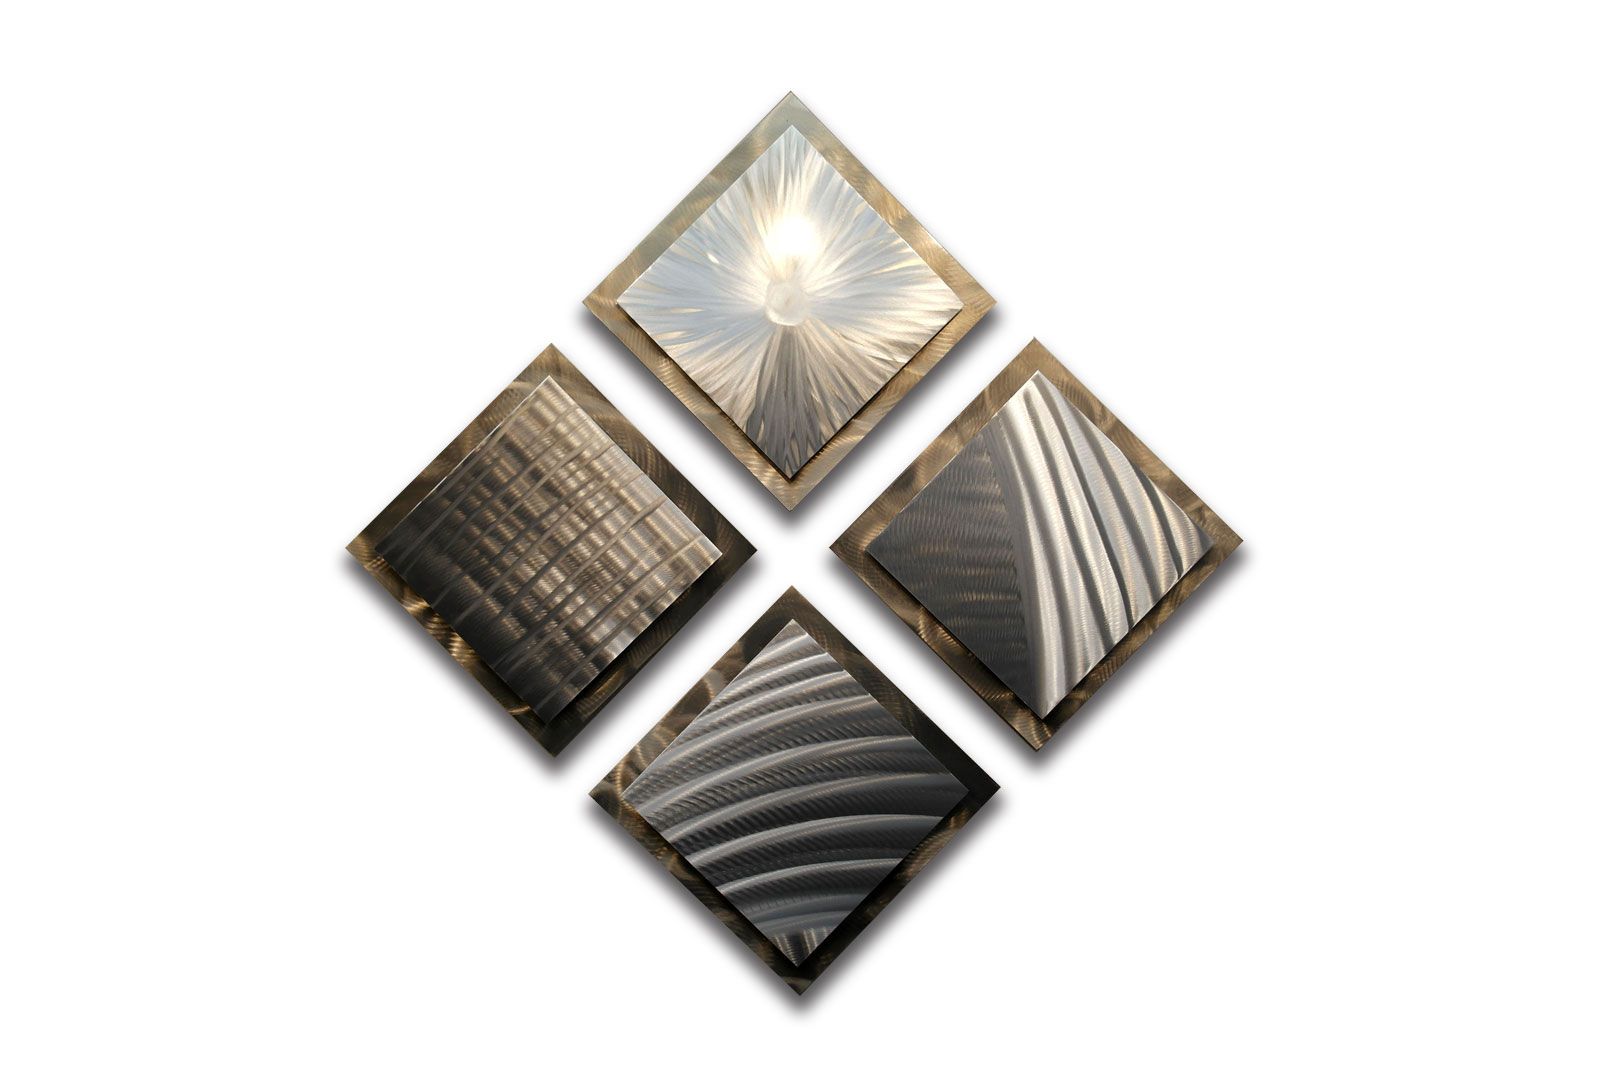 4 Squares  Gold Silver 35 X 35 – Metal Wall Art Abstract Sculpture Intended For Latest Gold And Silver Metal Wall Art (View 9 of 20)